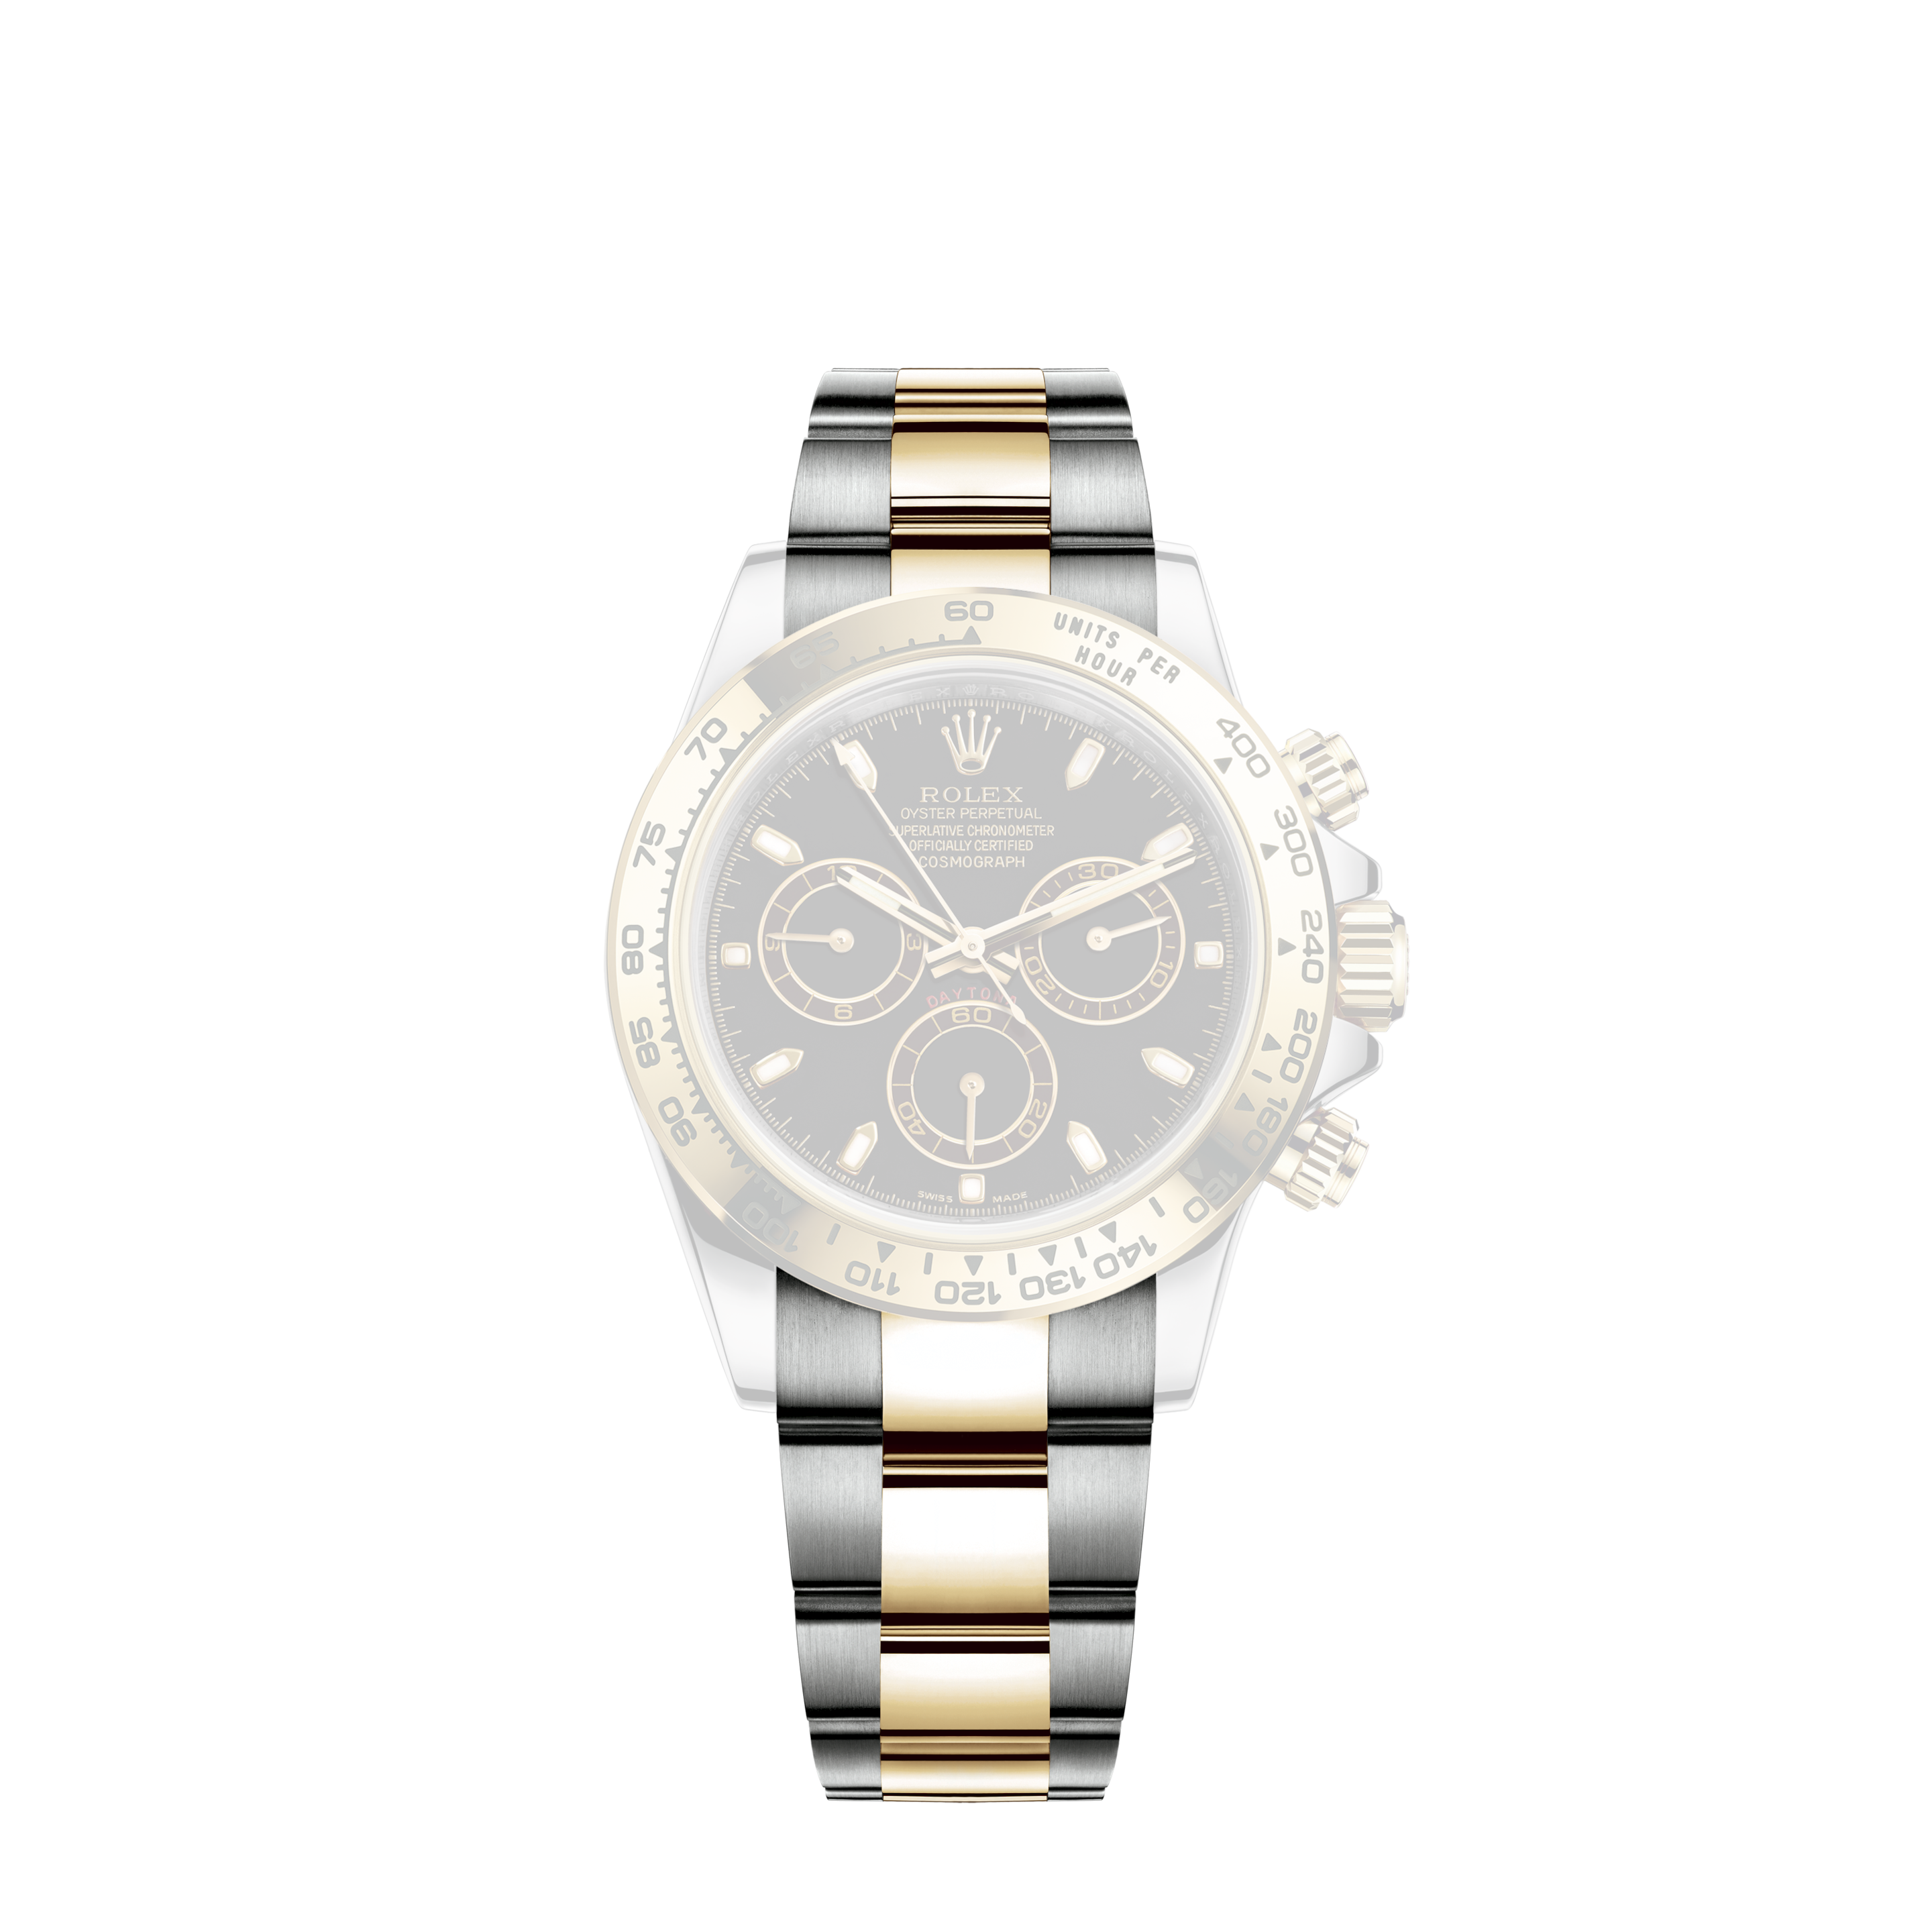 Rolex Oyster Perpetual Datejust 36 Champagne Dial Stainless Steel and 18K Yellow Gold Jubilee